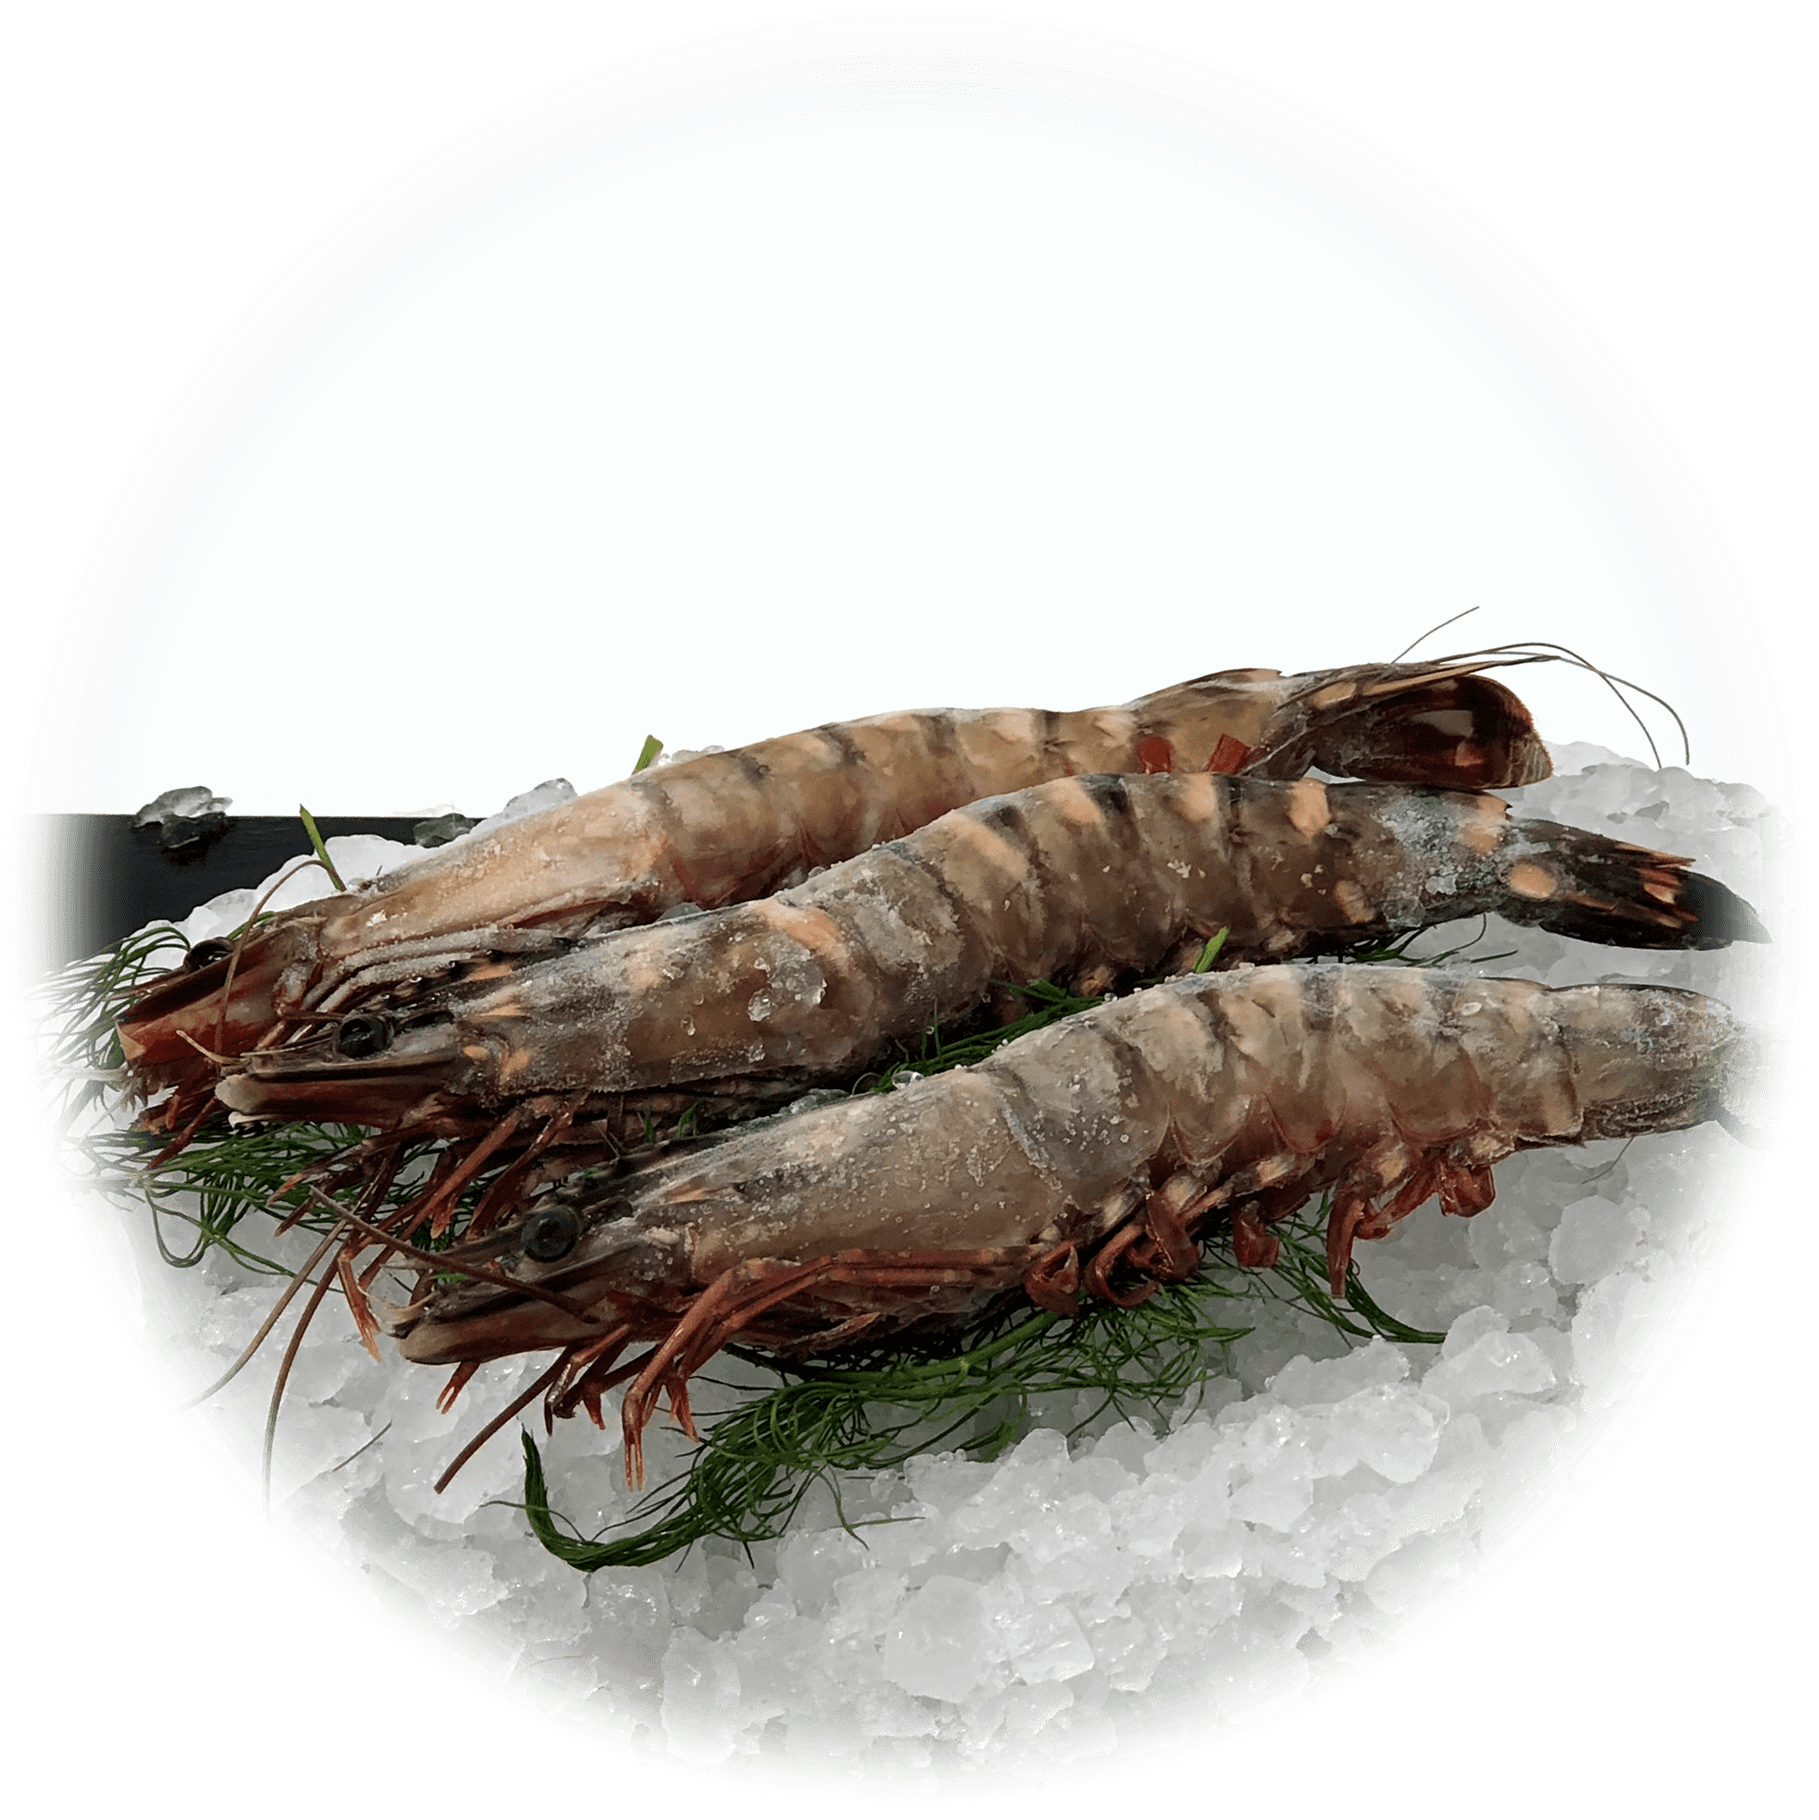 A Group Of Shrimp On Ice